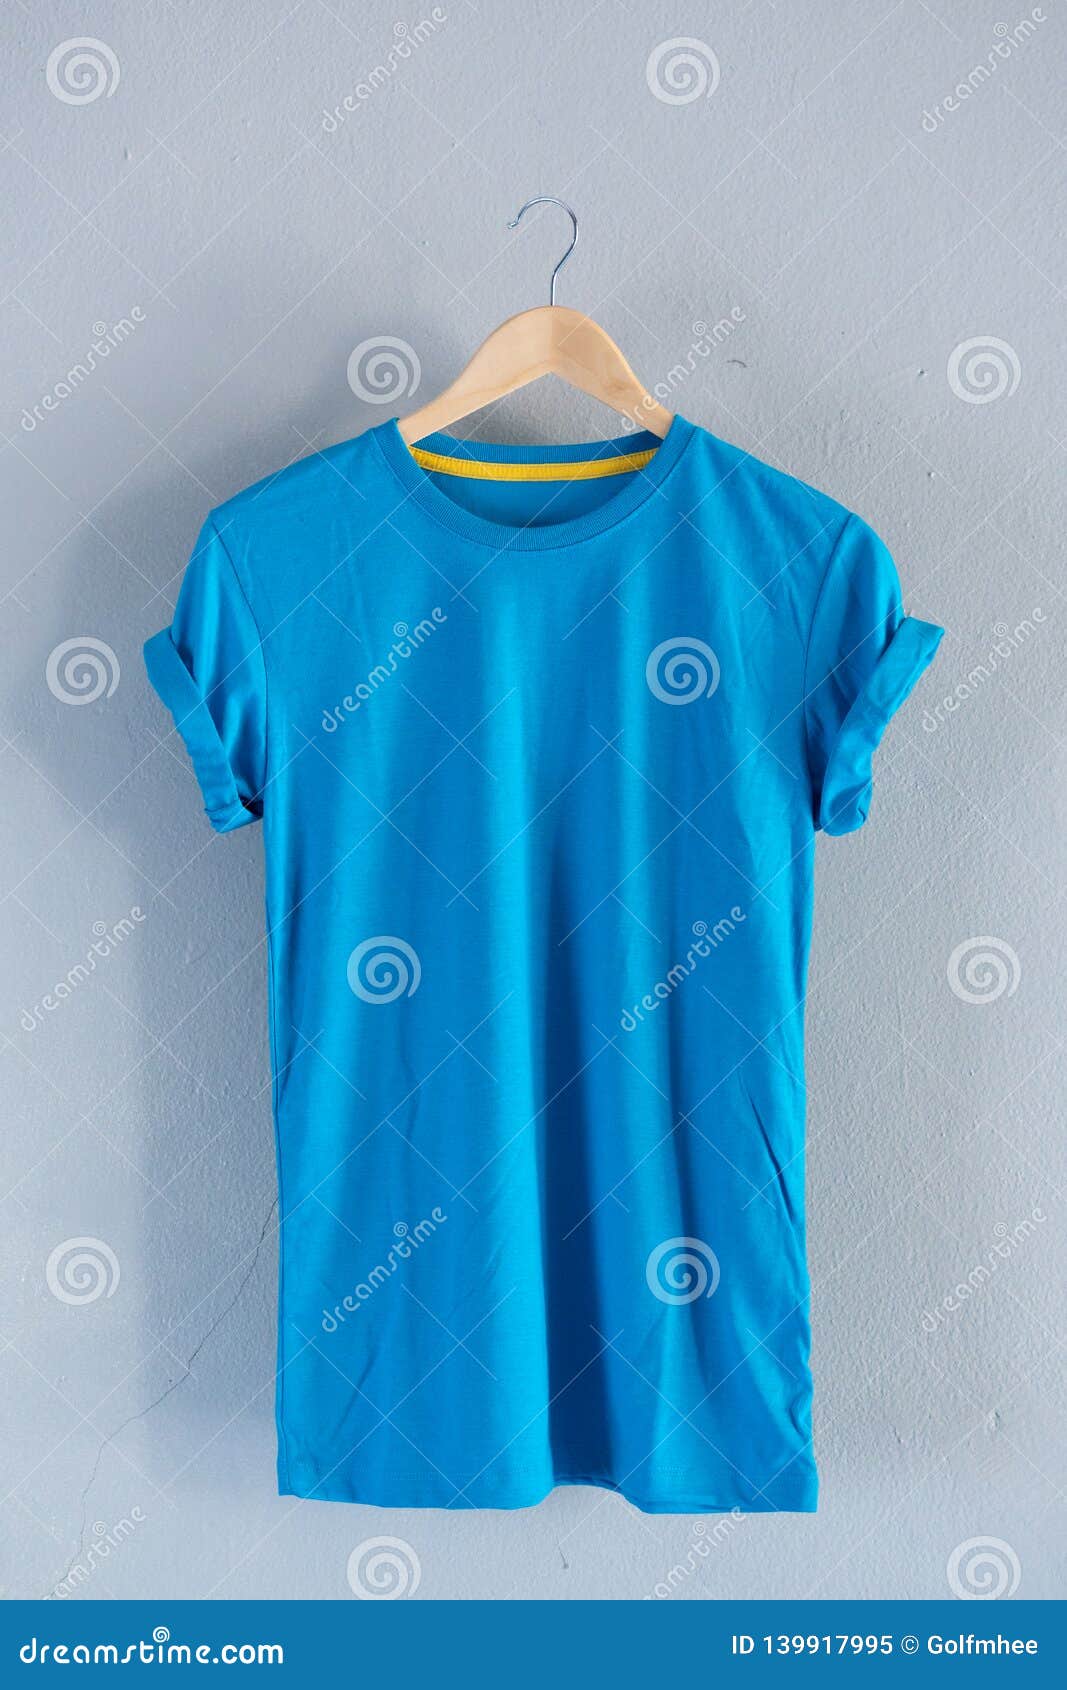 Retro Fold Blue Cotton T-Shirt Clothes Mock Up Template on Grunge White ...